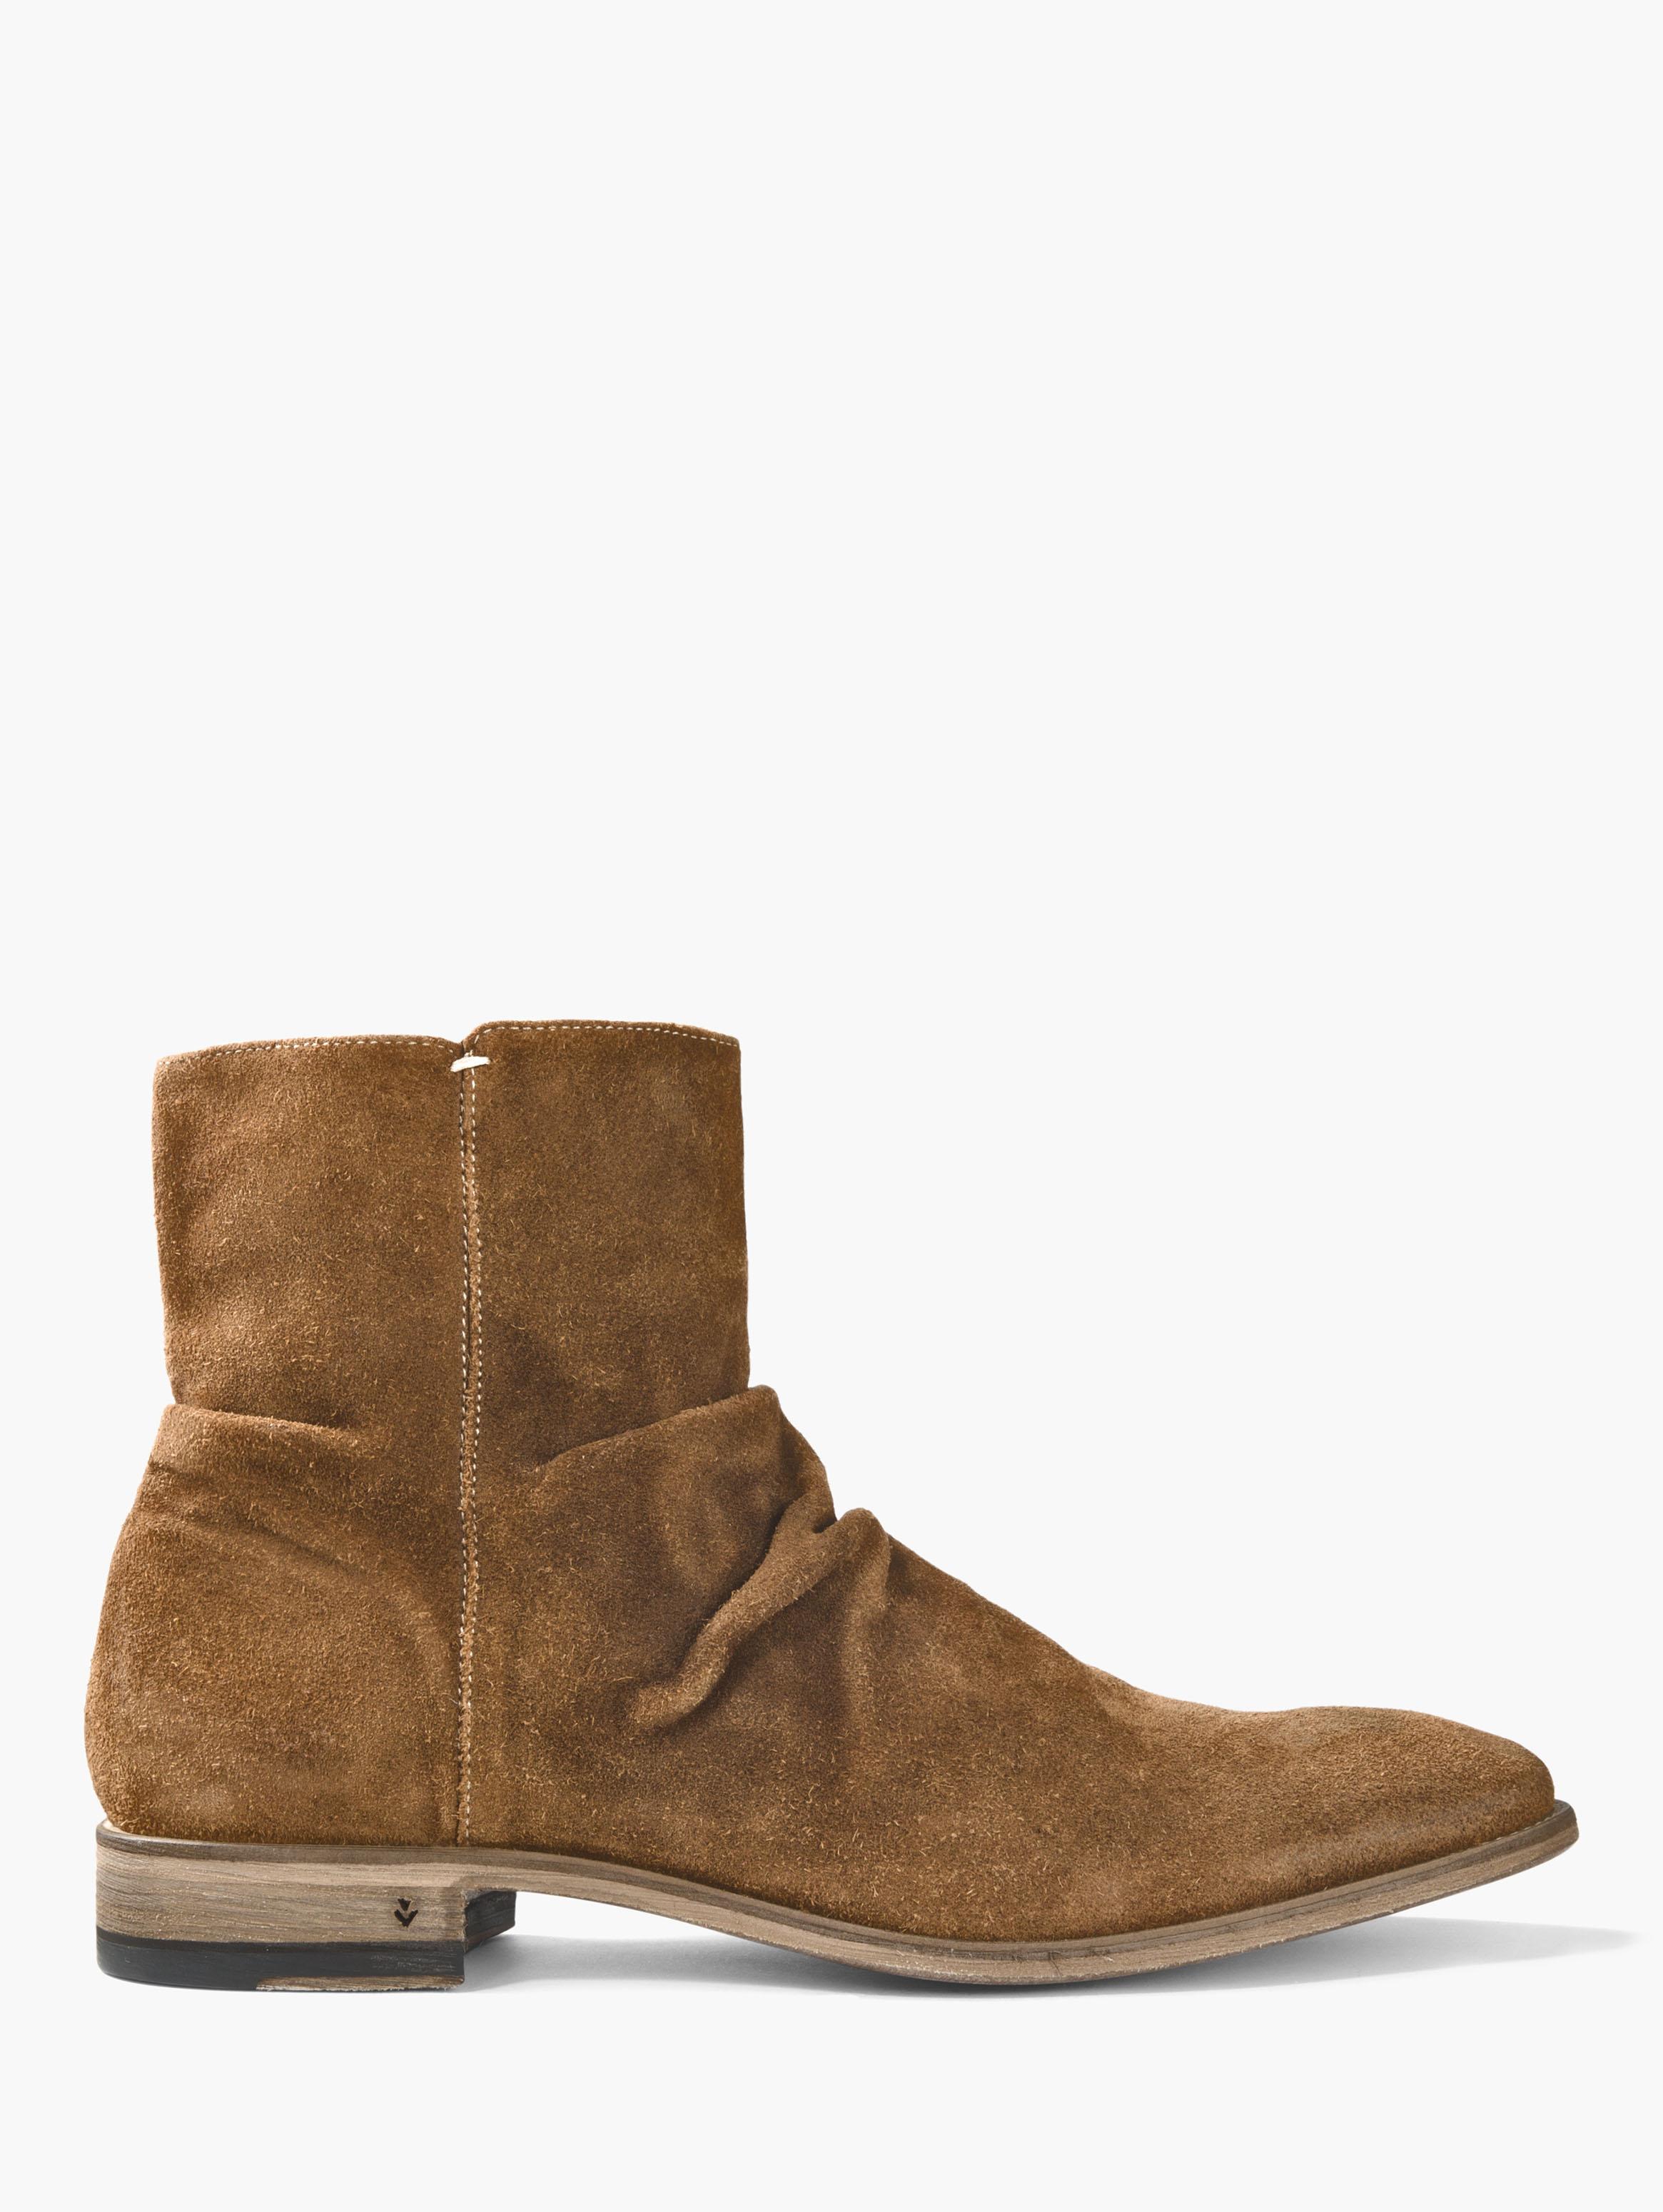 Suede Morrison Sharpei Boot image number 4